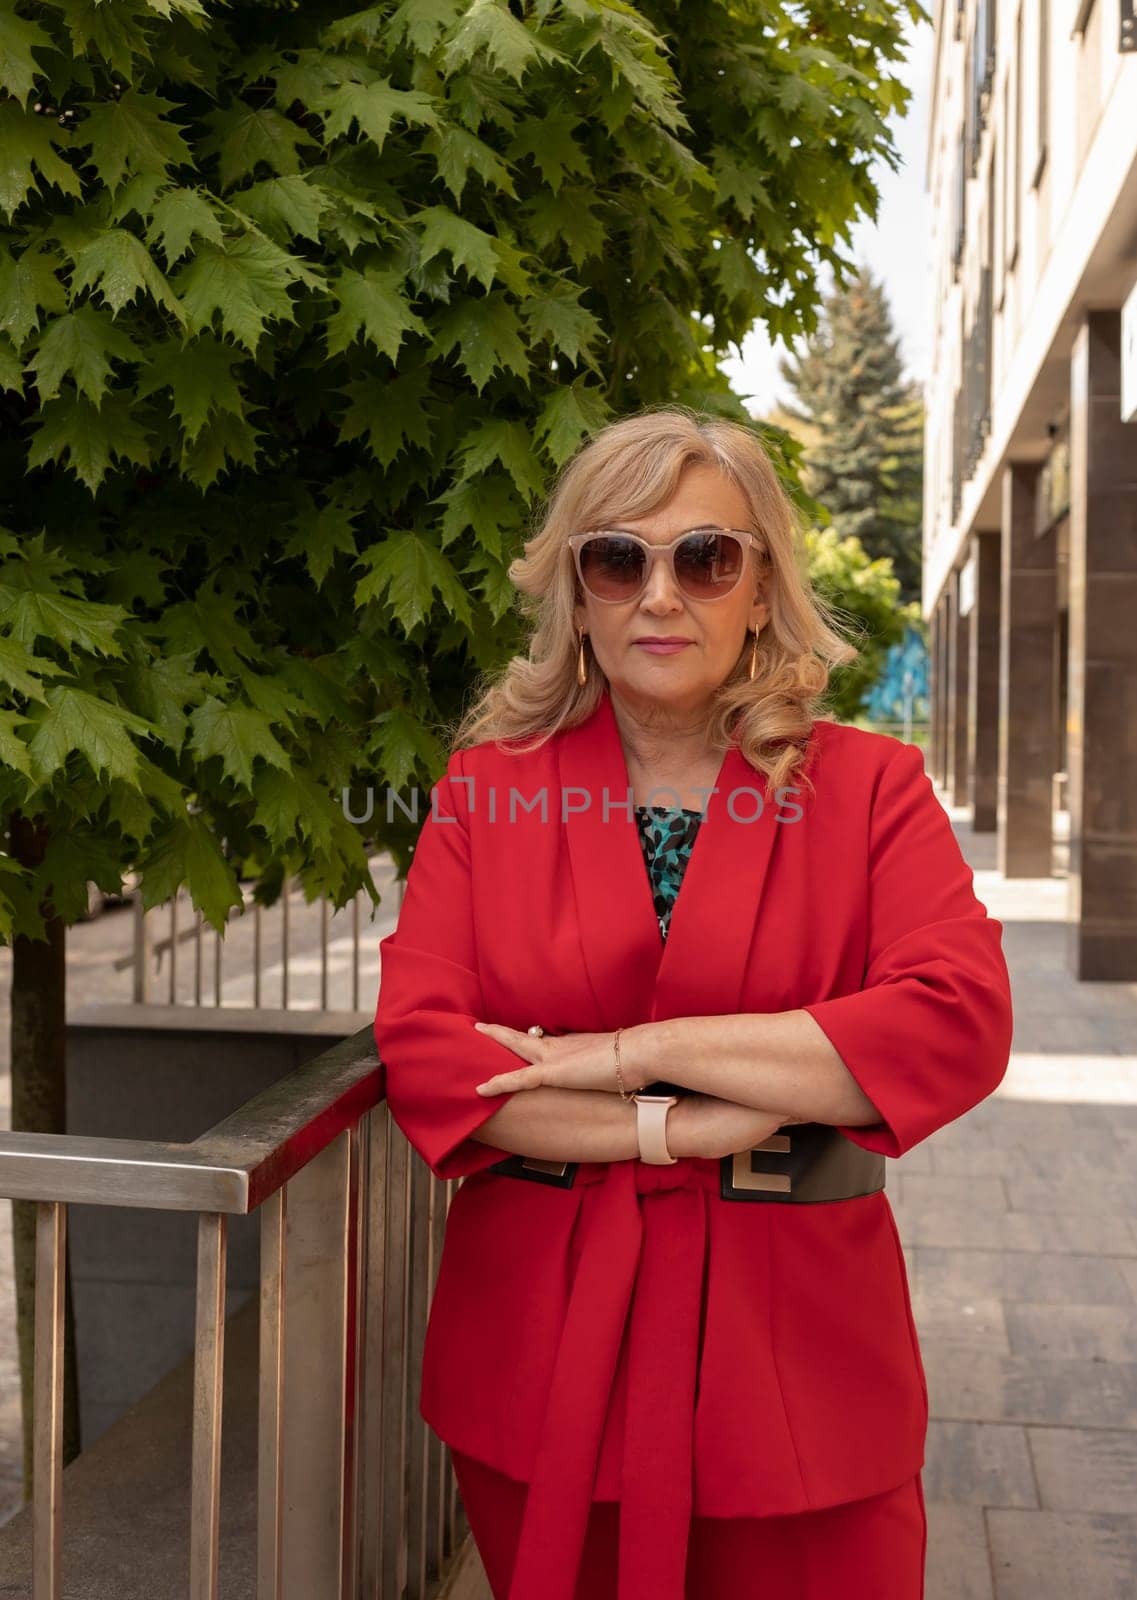 Portrait Posing Business Lady, Mature Sexagenarian Woman Outdoor in Summer Time, City, Stylish Confident Senior Female in her 60s Wears Sunglasses. Boss or Manager. Vertical Plane. High quality photo